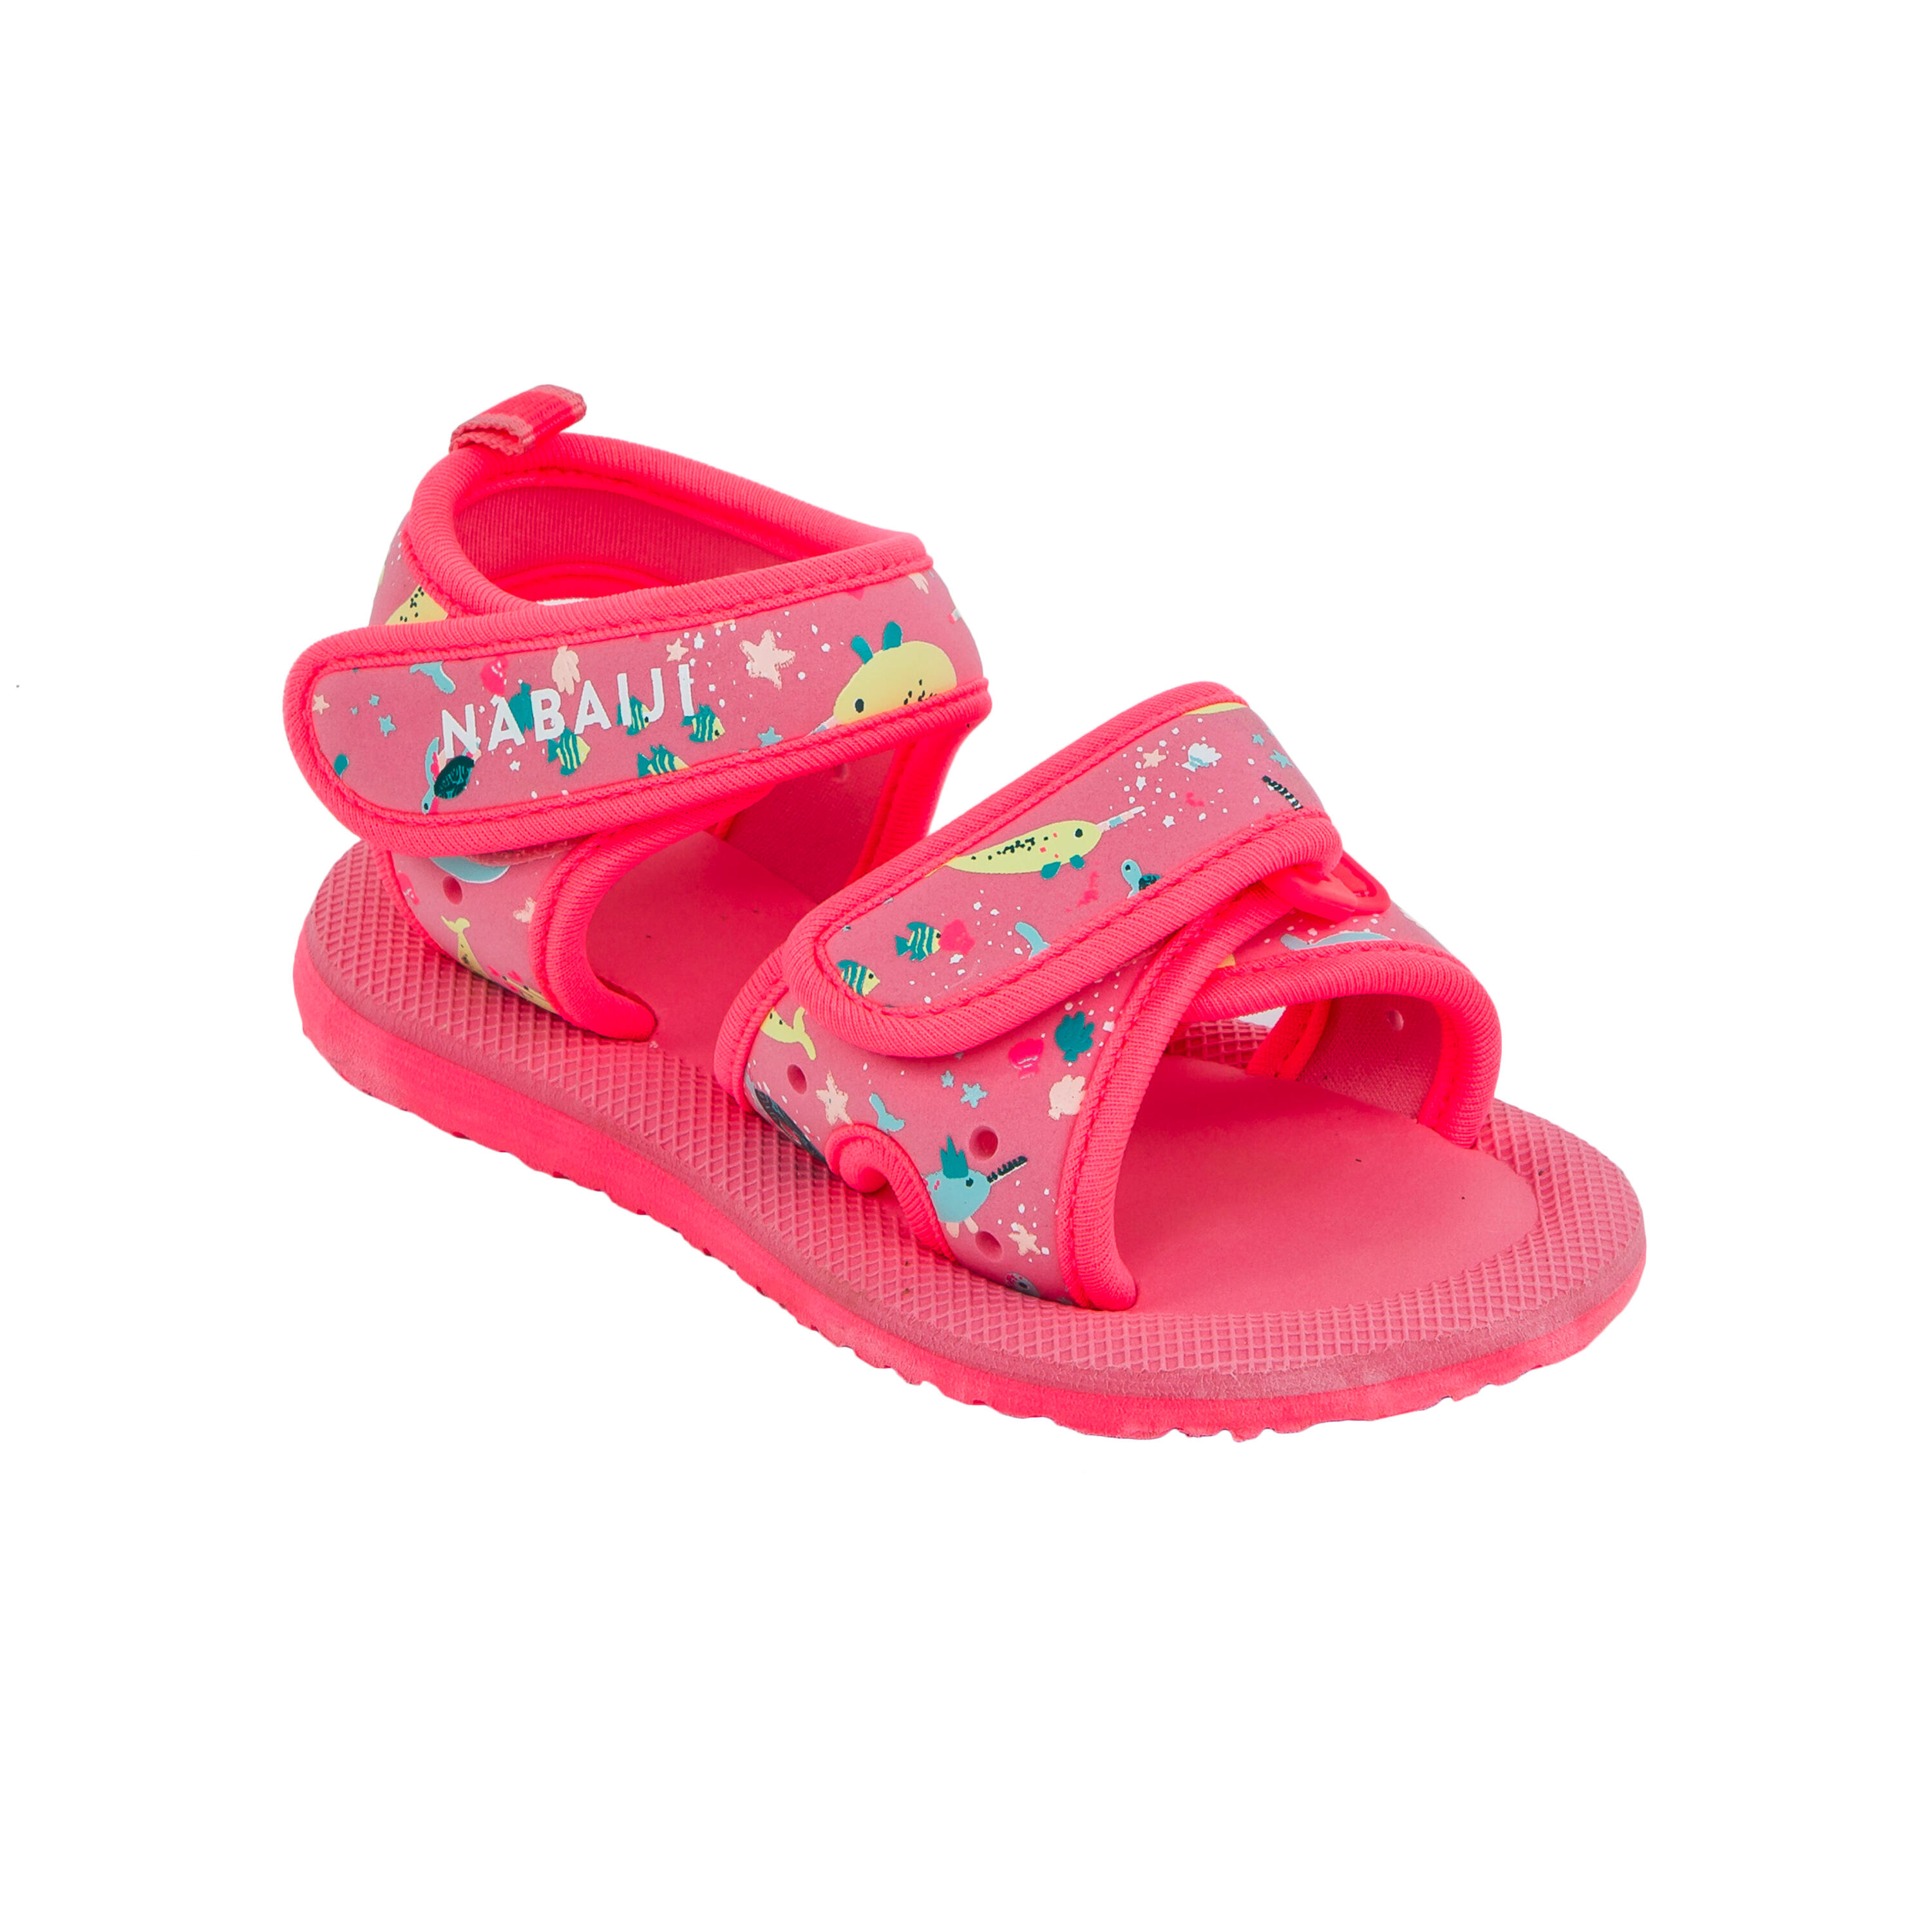 Best kids beach shoes & water shoes: Crocs, M&S sandals and more | HELLO!